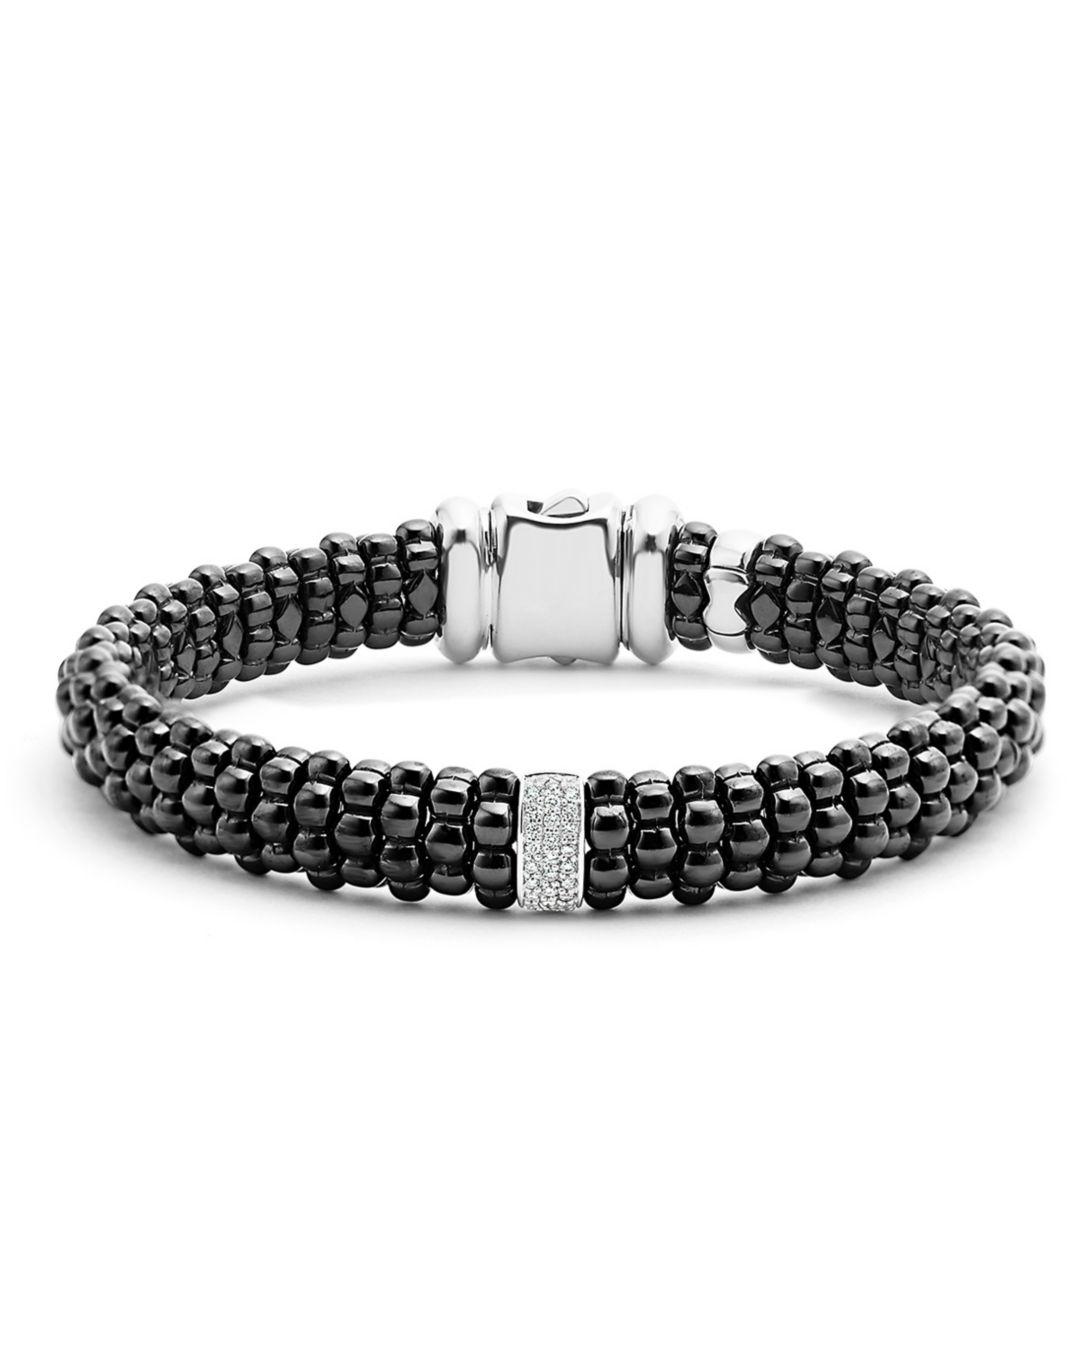 Lyst - Lagos Black Caviar Ceramic Bracelet With Sterling Silver And 1 ...